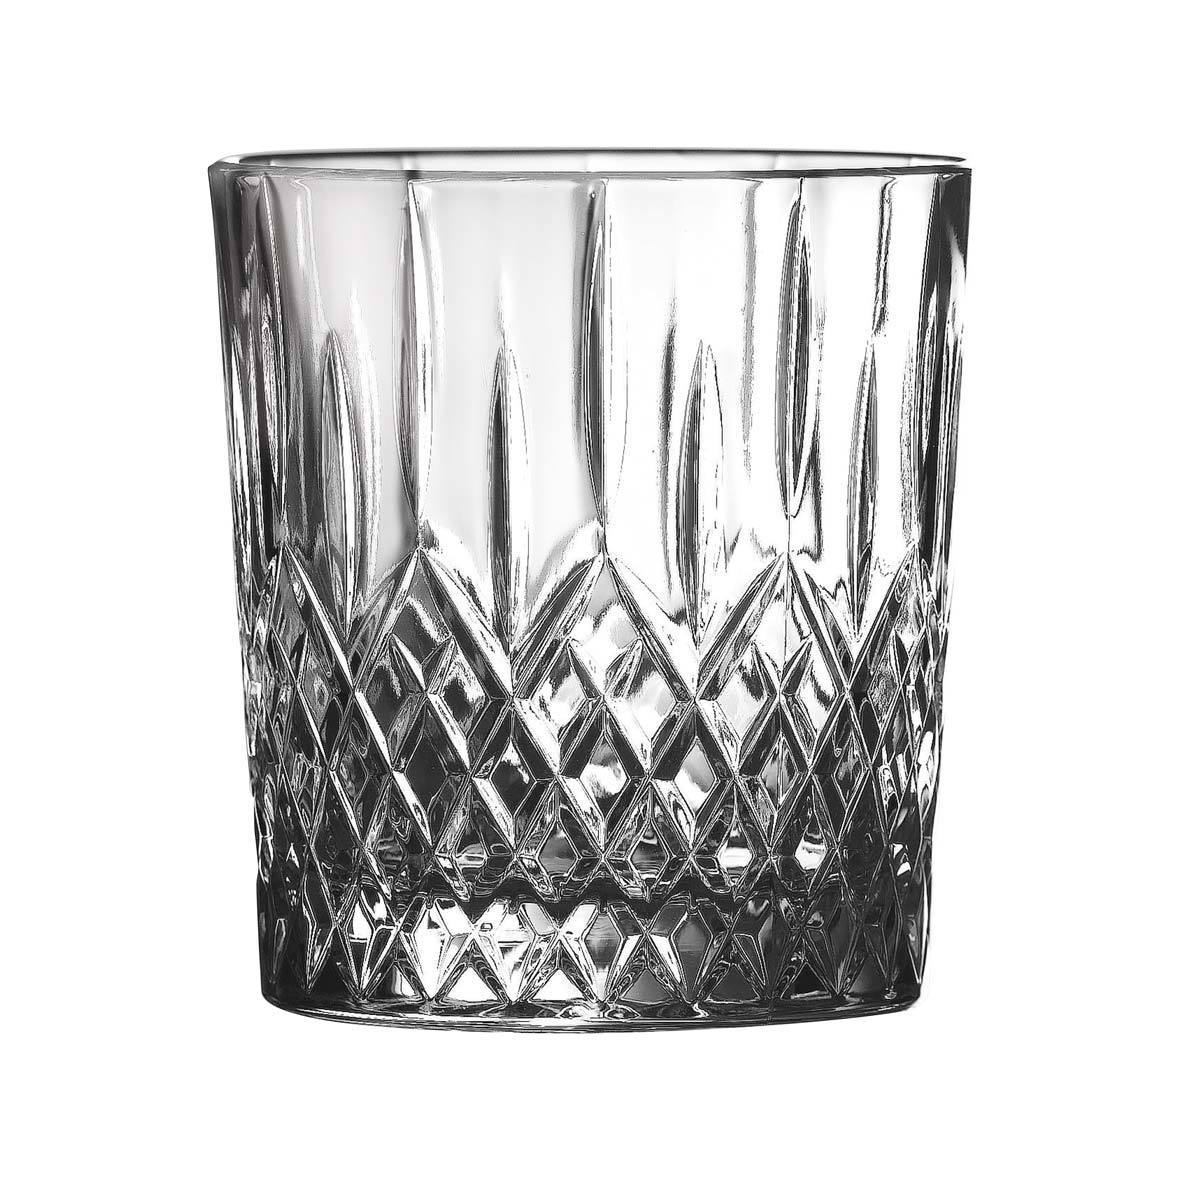 Royal Doulton Earlswood Crystal Tumblers, Set of 6